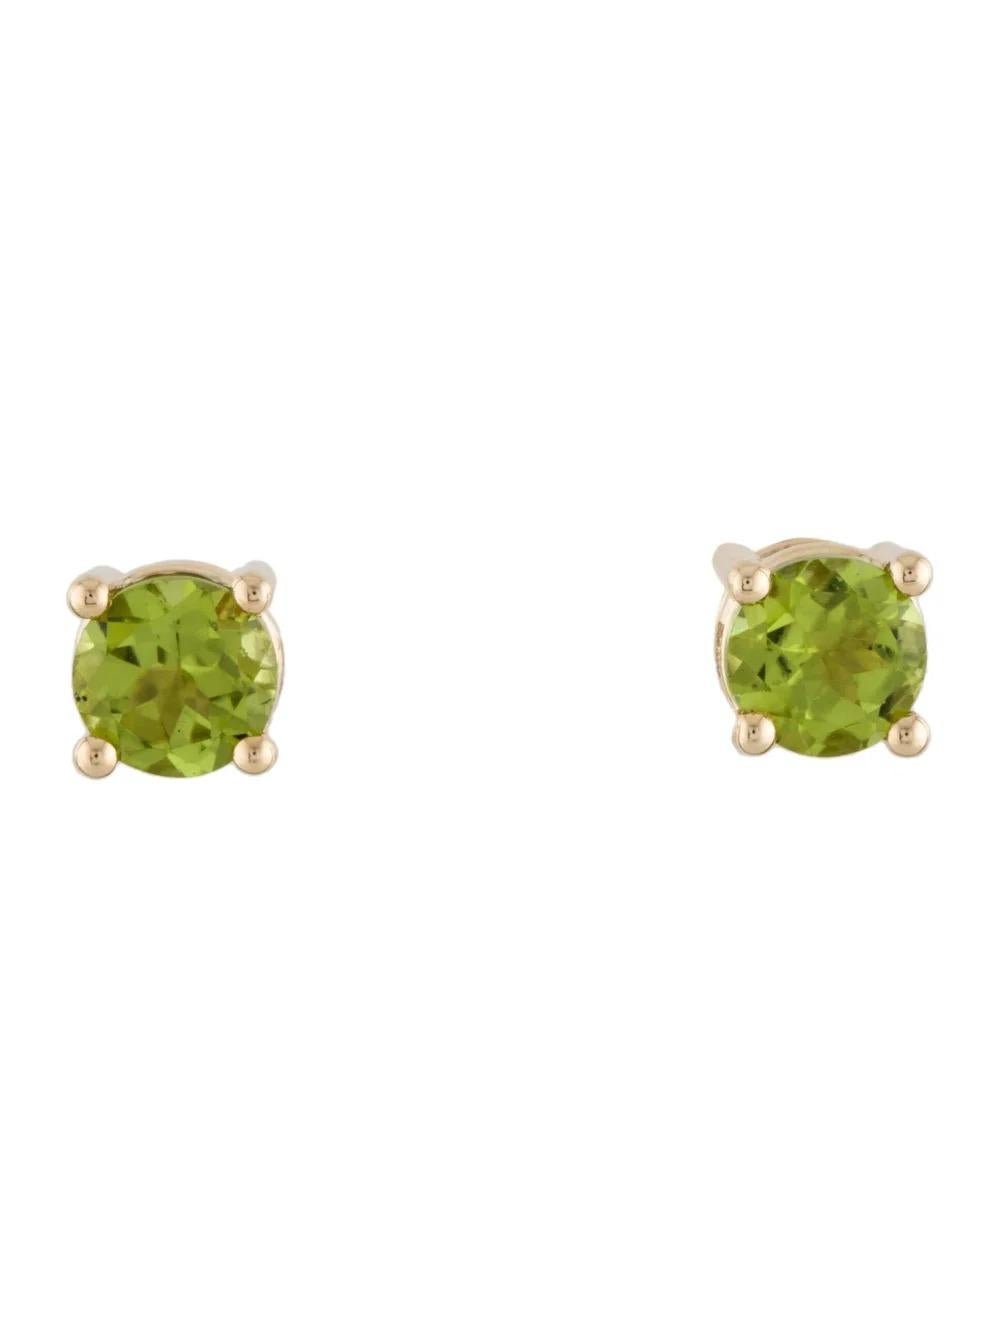 This stunning pair of stud earrings exudes elegance and charm, crafted in lustrous 14K yellow gold. Adorning each earring is a vibrant round brilliant peridot, totaling 2.66 carats, adding a touch of natural beauty and sophistication to any